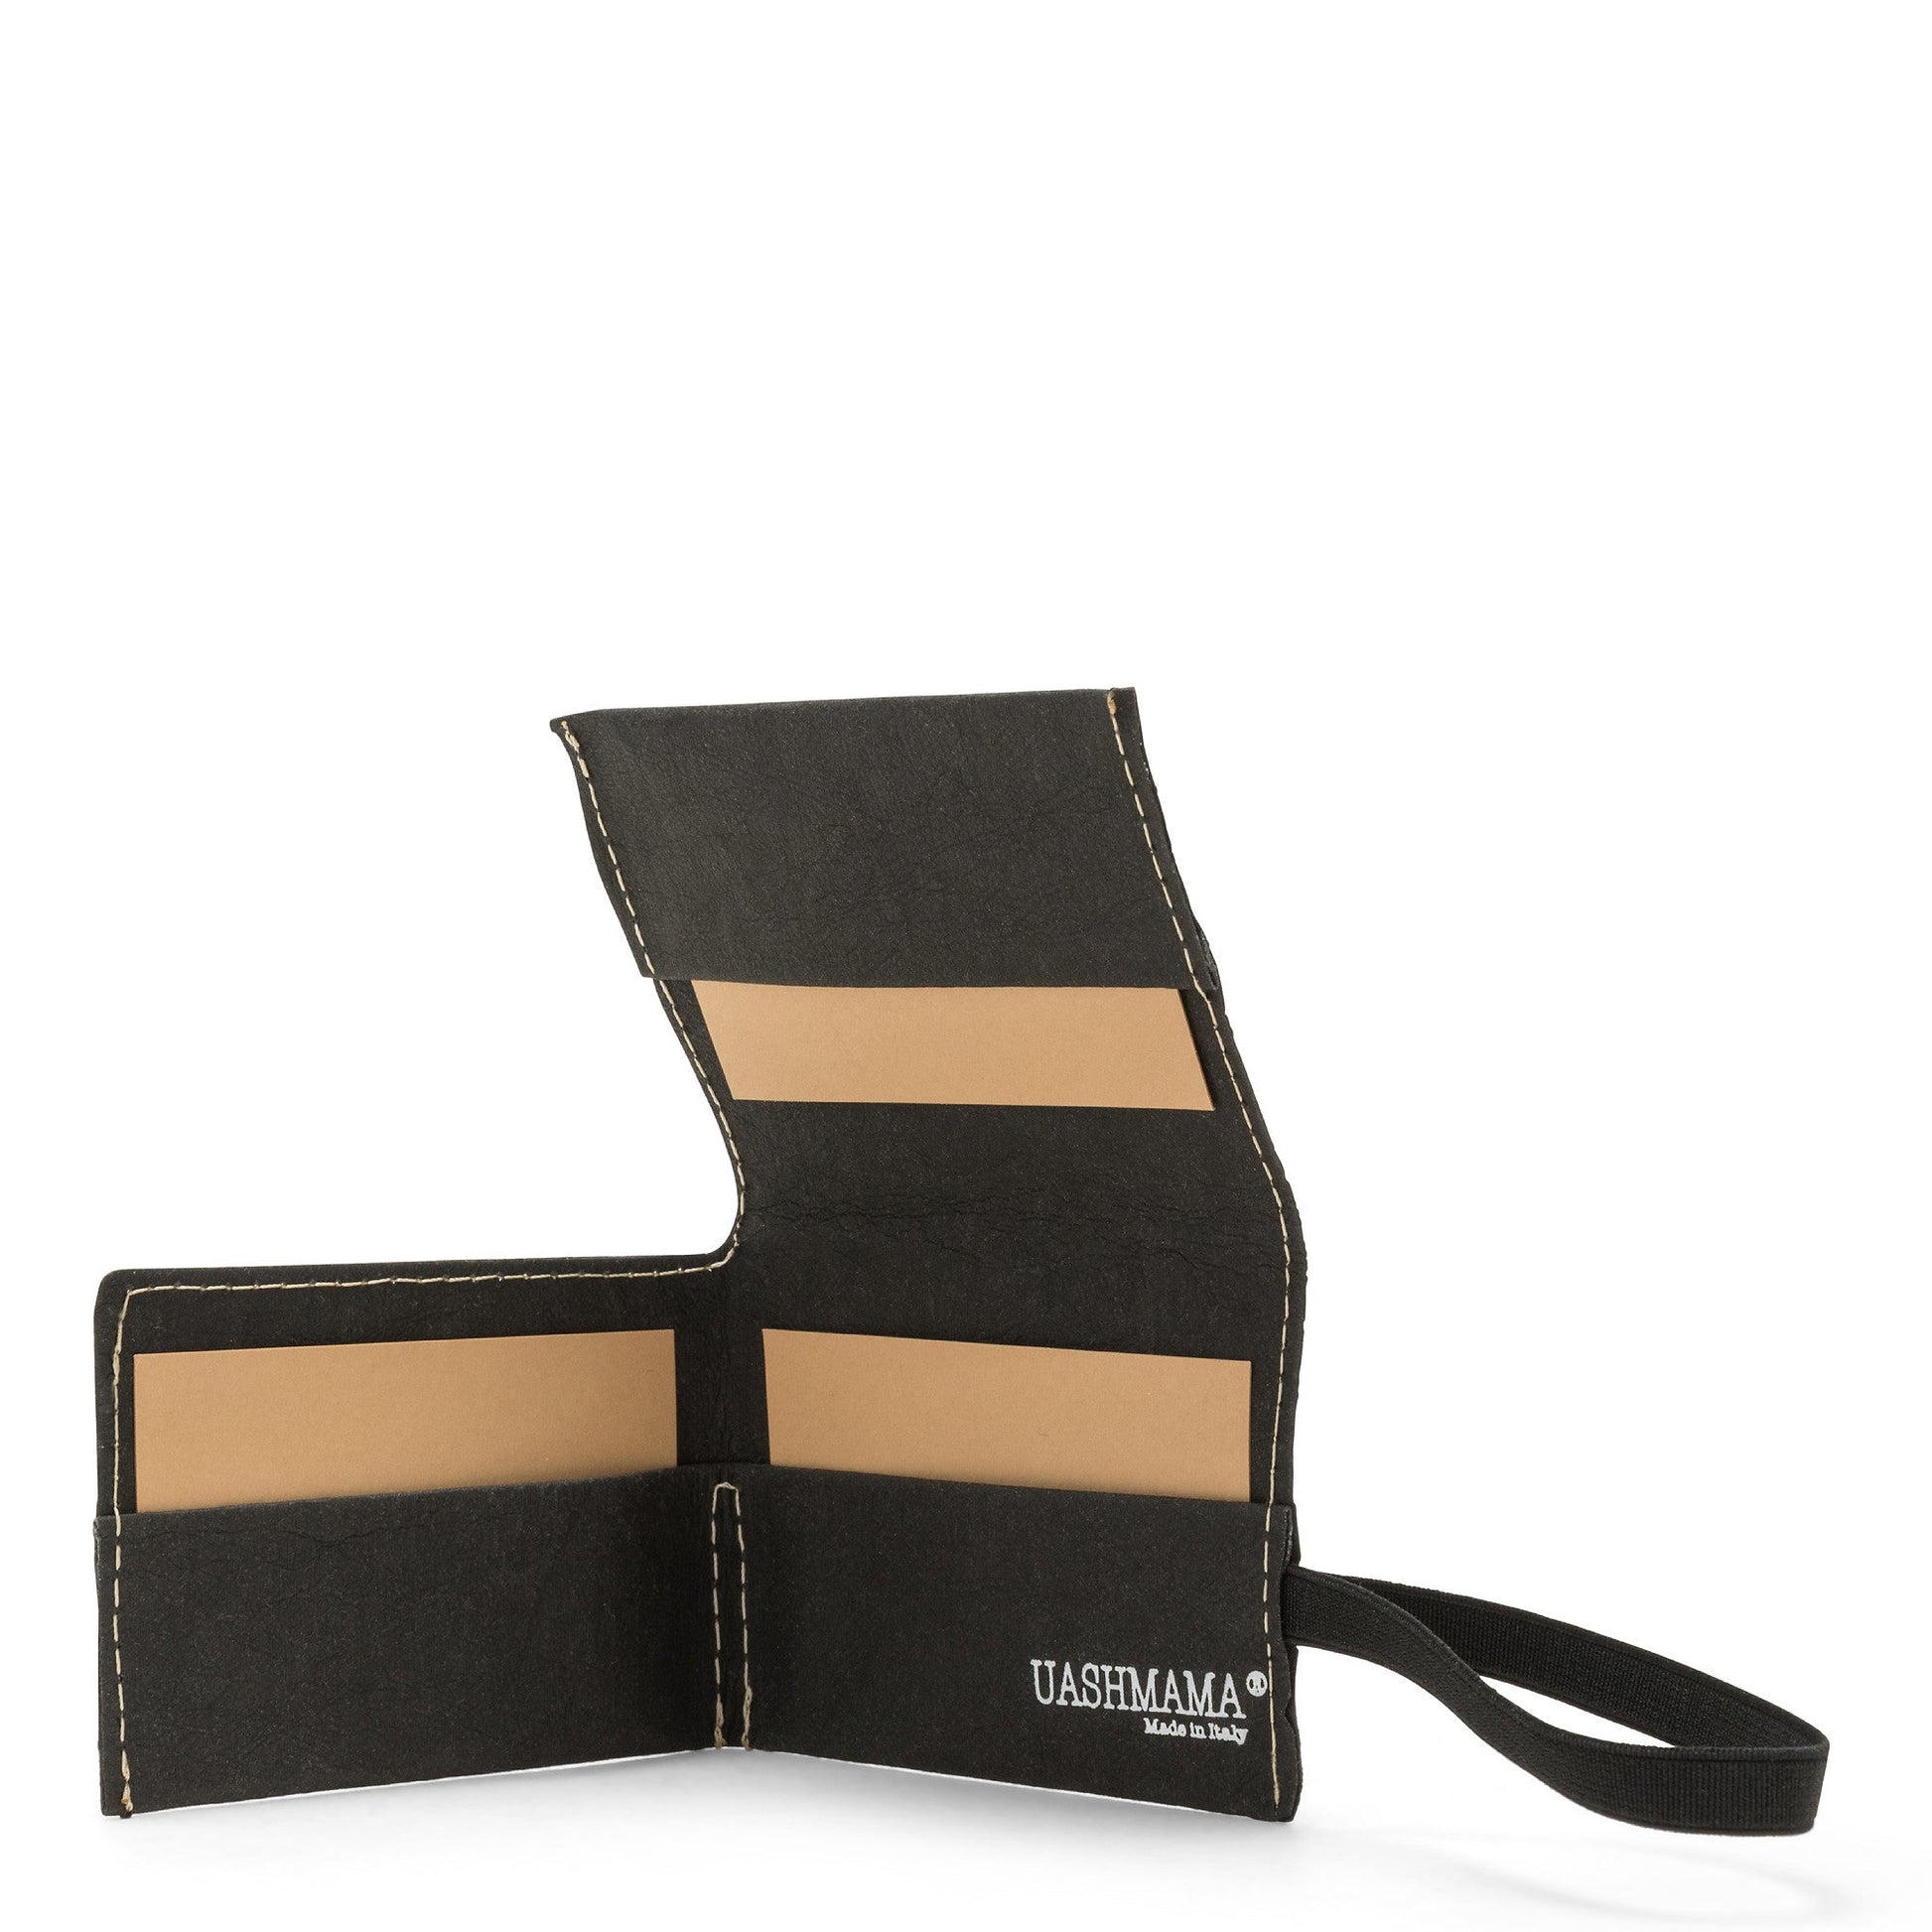 A black washable paper card holder is shown open from the front angle. It features a black elastic side strap and the white UASHMAMA logo stamped on the inside bottom right.